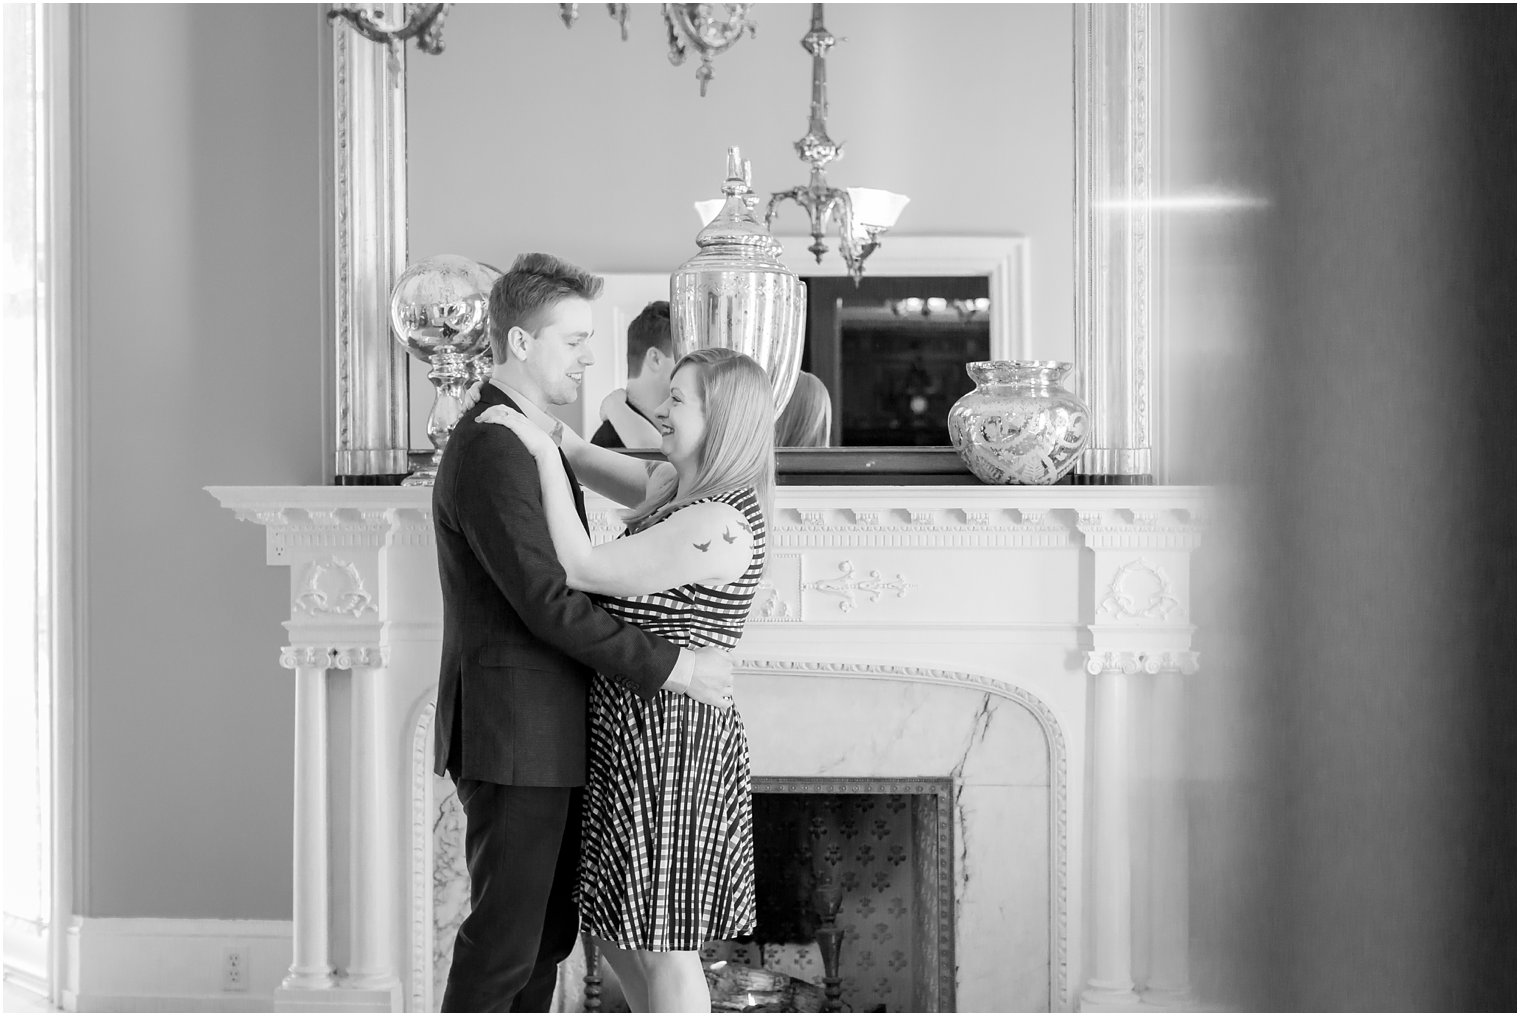 Romantic photo in the Southern Mansion